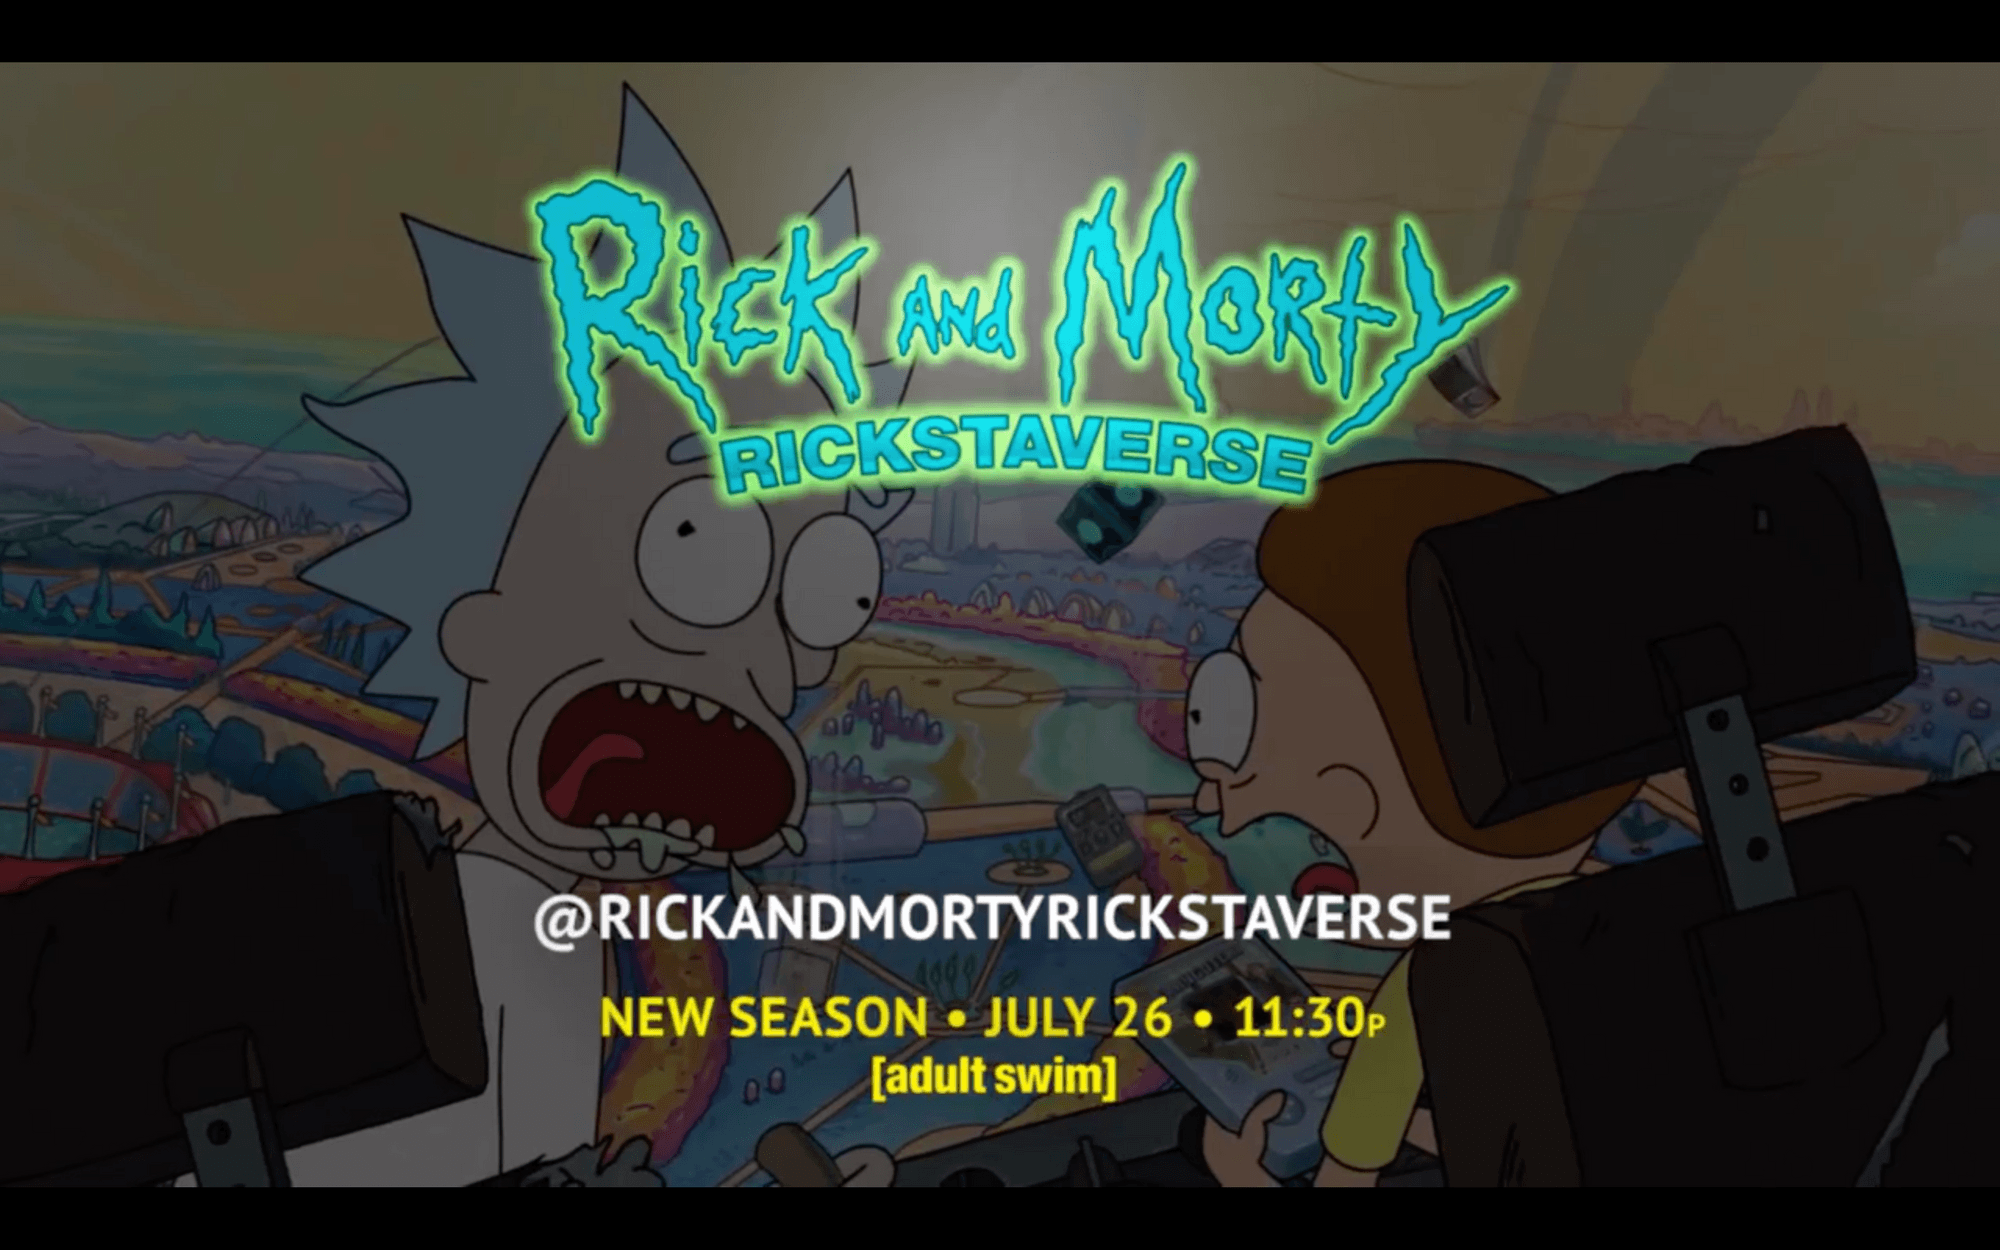 Rick and Morty Rickstaverse Instagram game advertisement